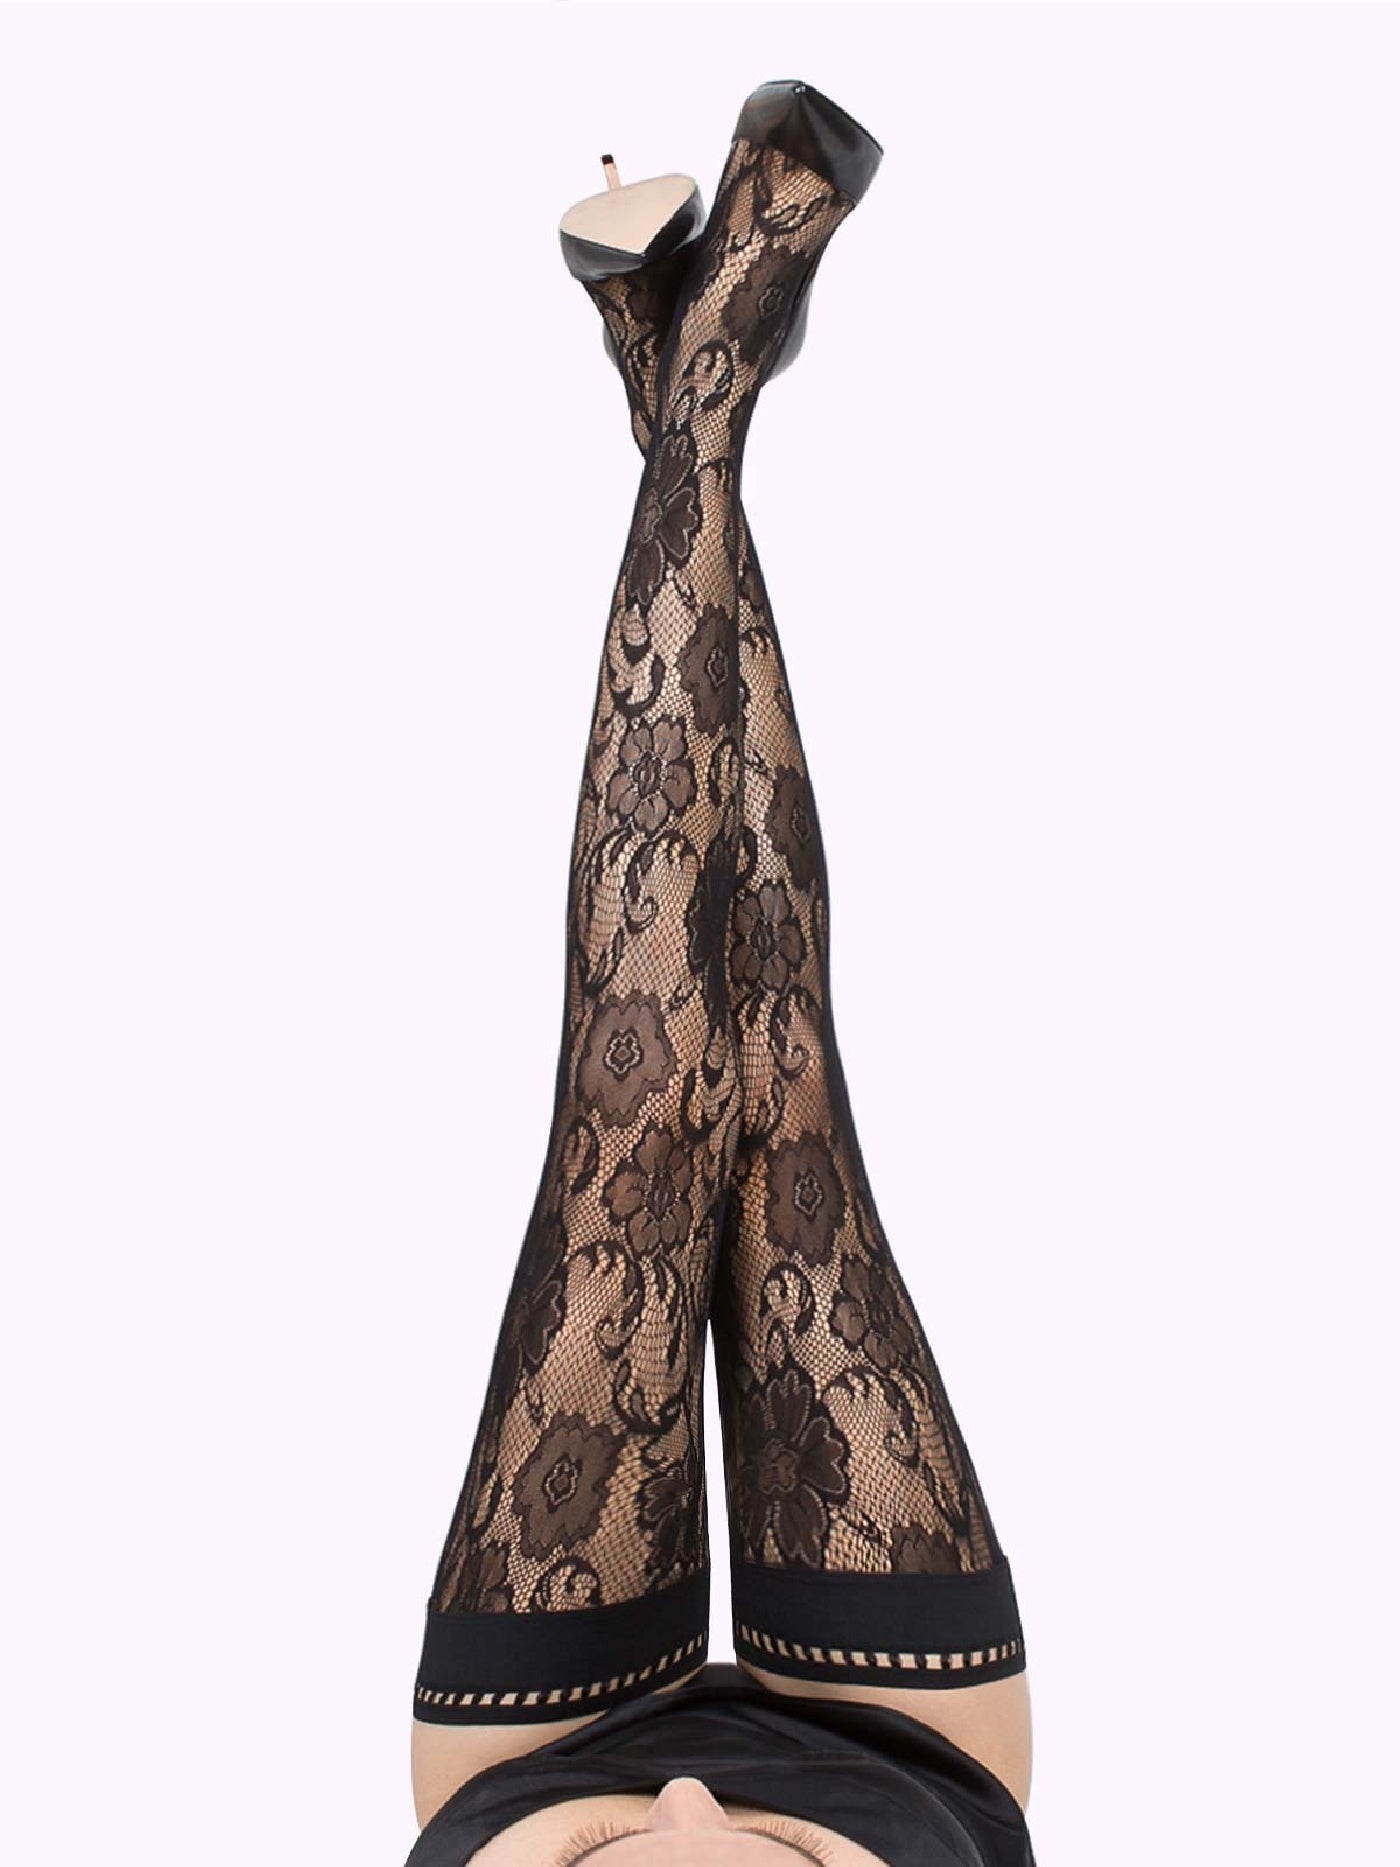 How to buy tights online. There's no surprise; buying stockings…, by  VienneMilano